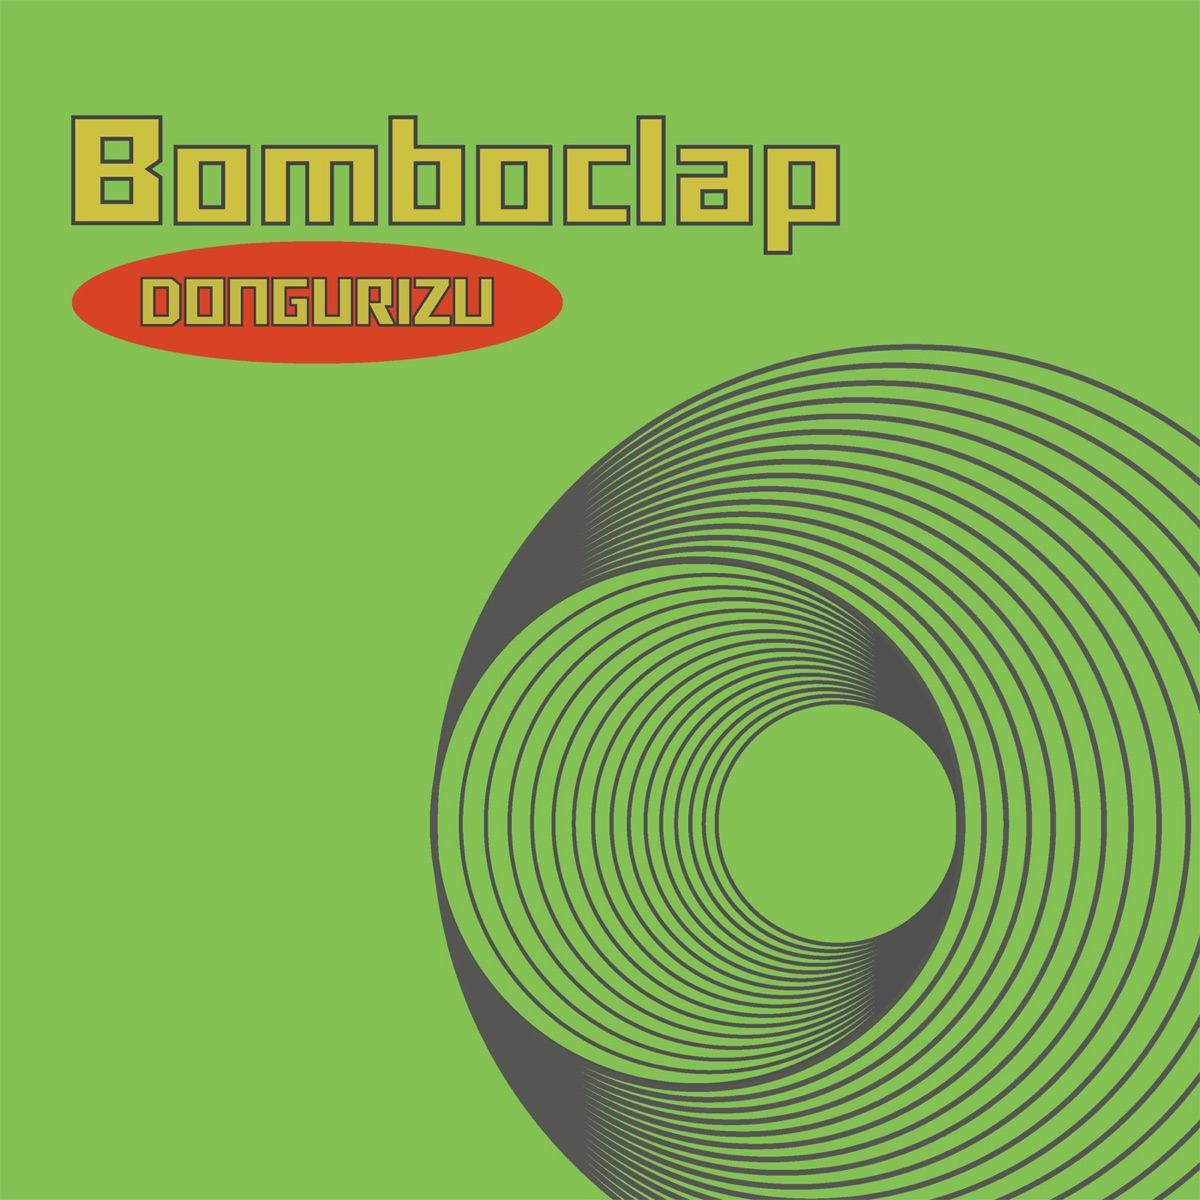 Cover art for『DONGURIZU - Bomboclap』from the release『Bomboclap